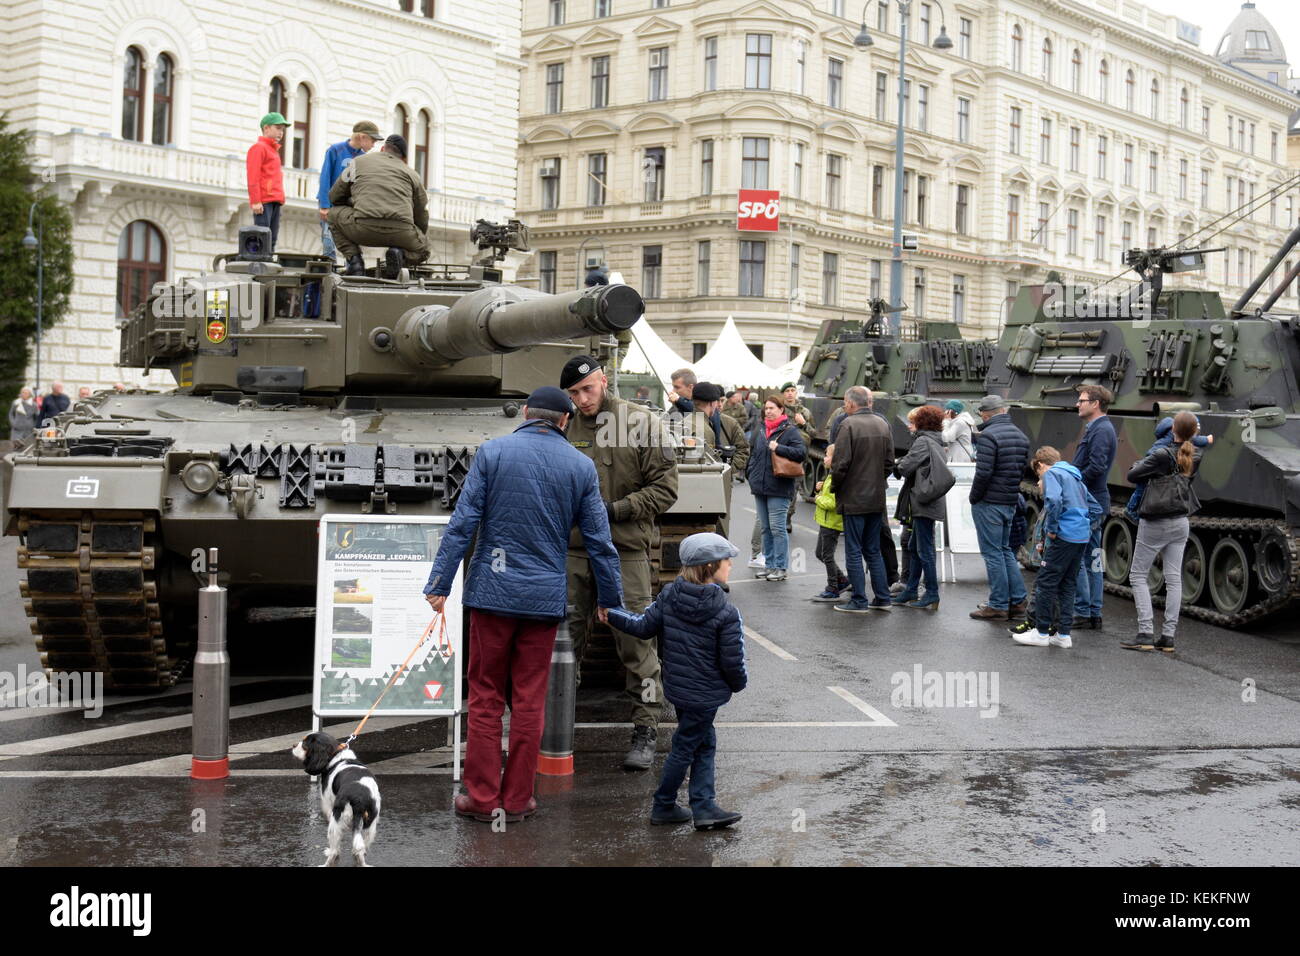 Vienna, Austria. 22 October 2017. Austrian National Day 2017. The Austrian Armed Forces presents its tasks and opportunities for information and performance on the national holiday in Vienna. Visitors marvel at the tanks of the Austrian Armed Forces. Credit: Franz Perc / Alamy Live News Stock Photo